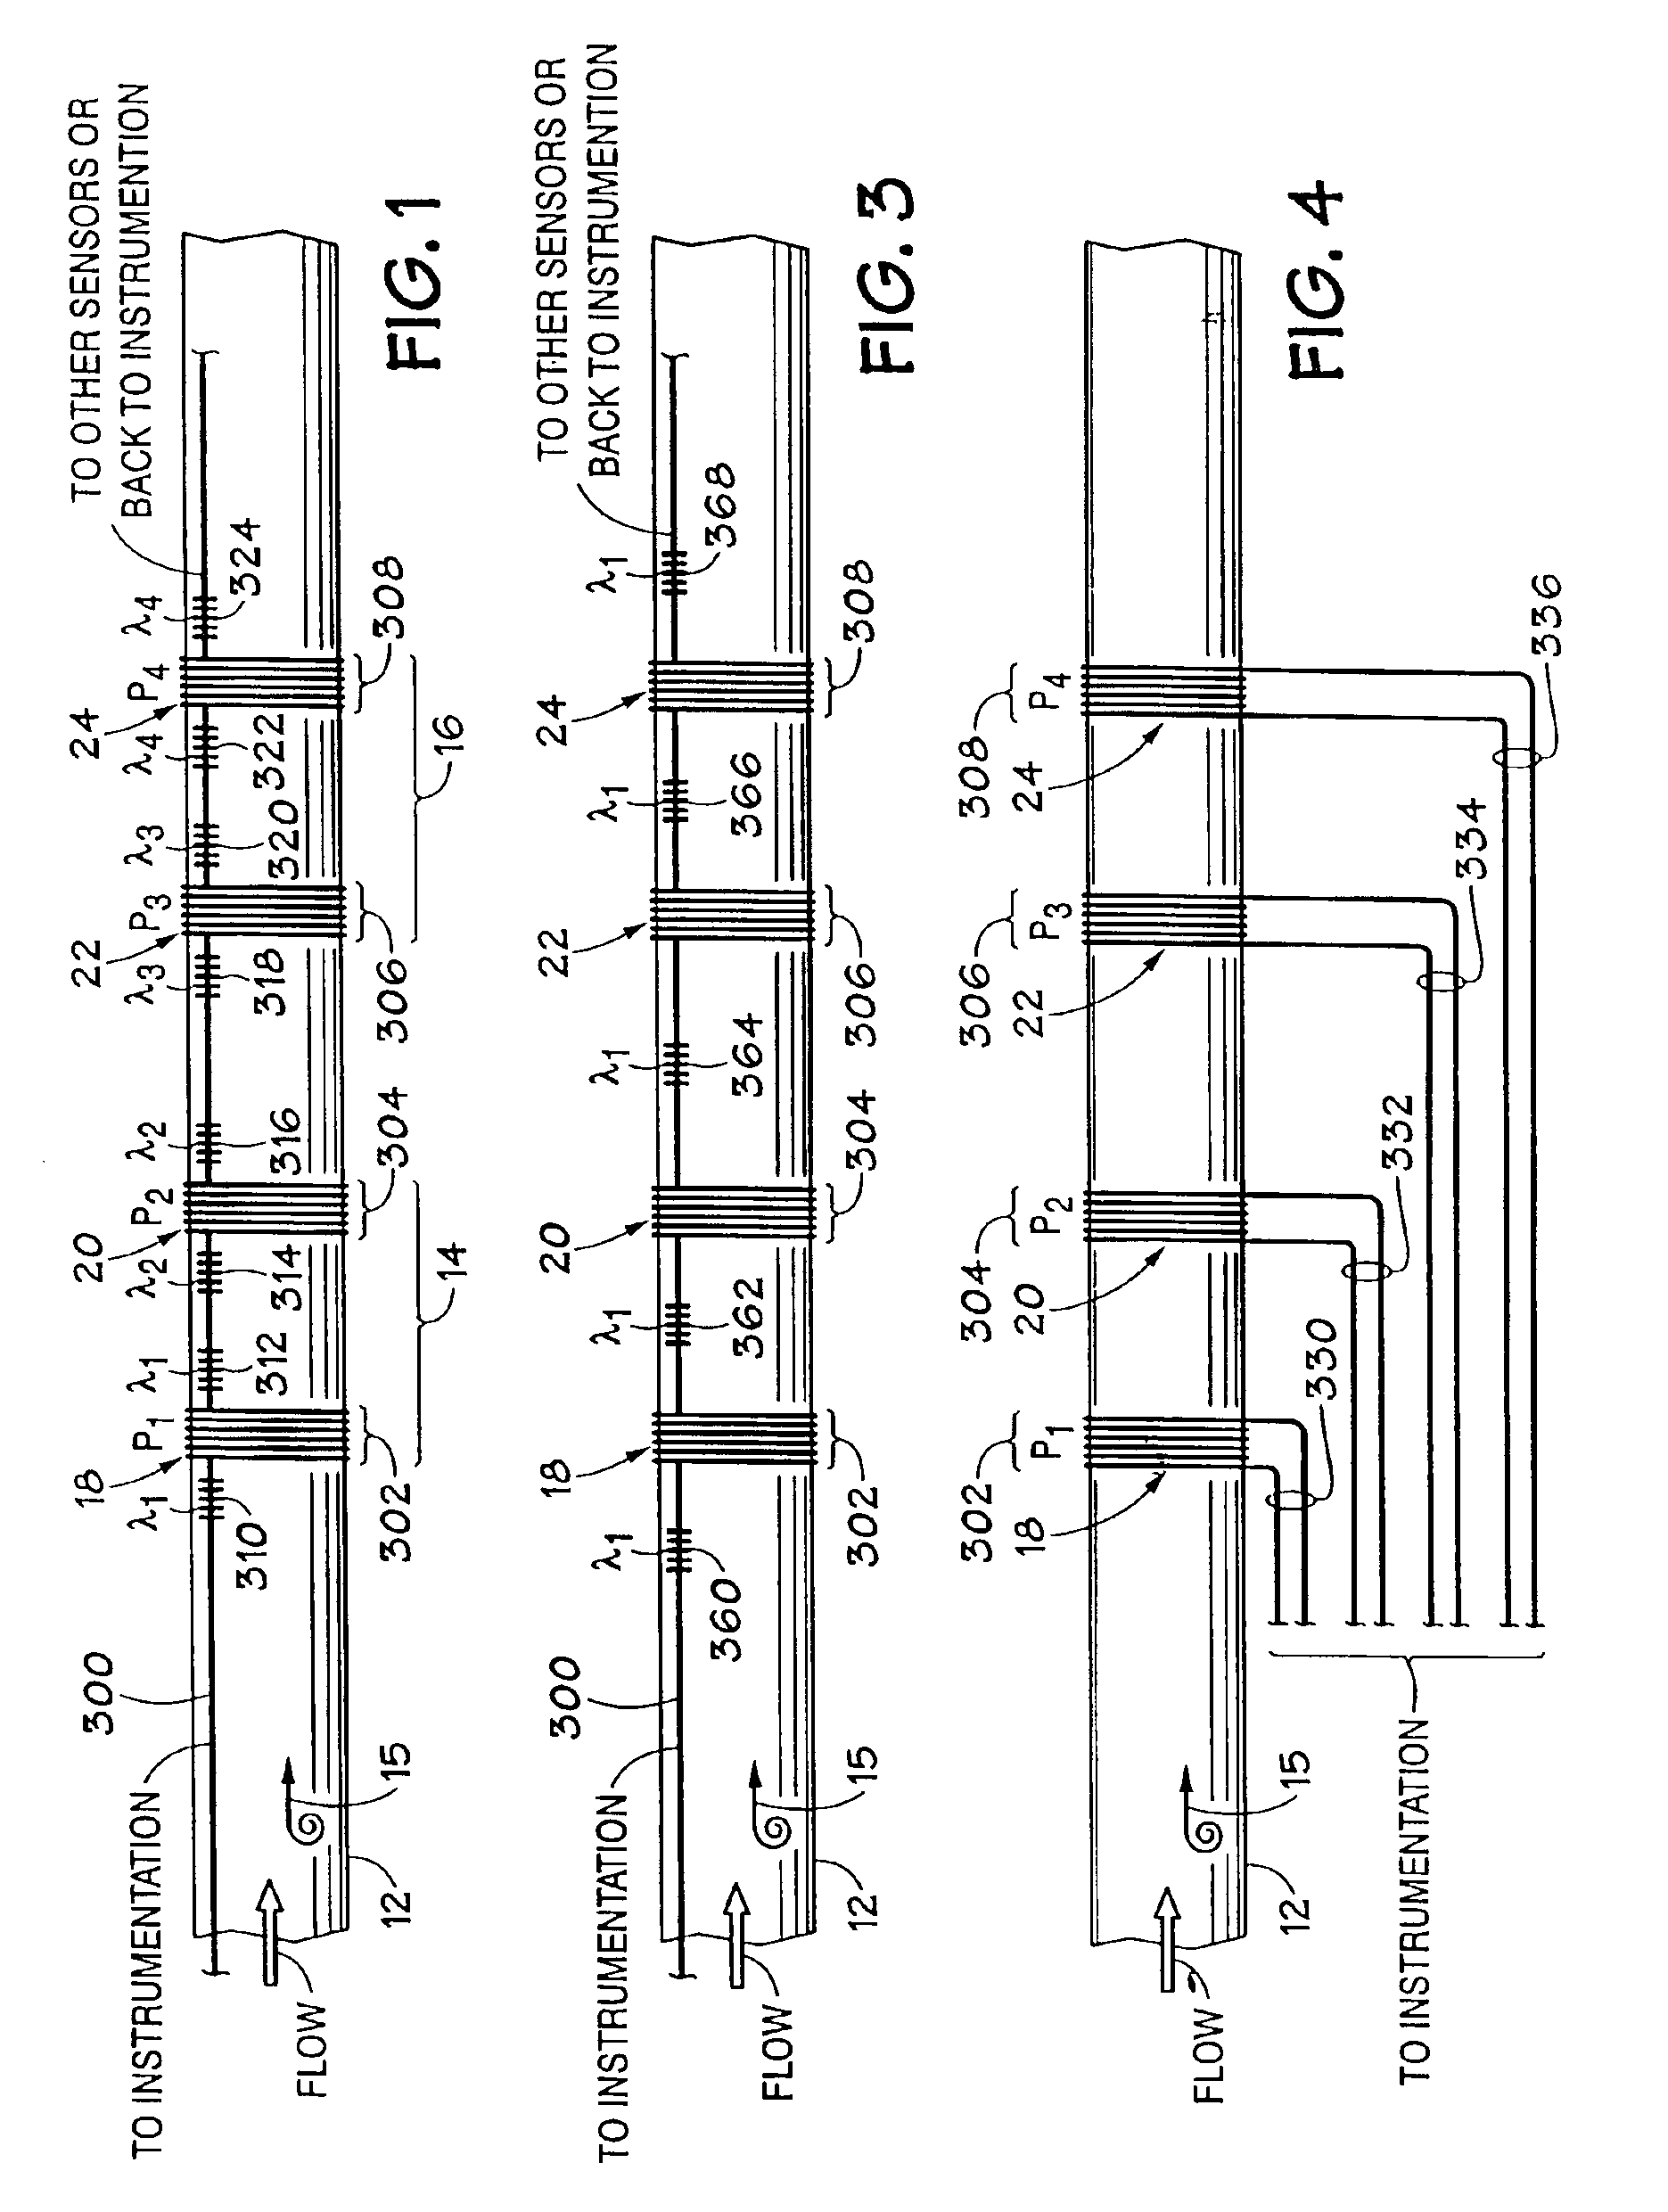 Apparatus and method having an optical fiber disposed circumferentially around the pipe for measuring unsteady pressure within a pipe